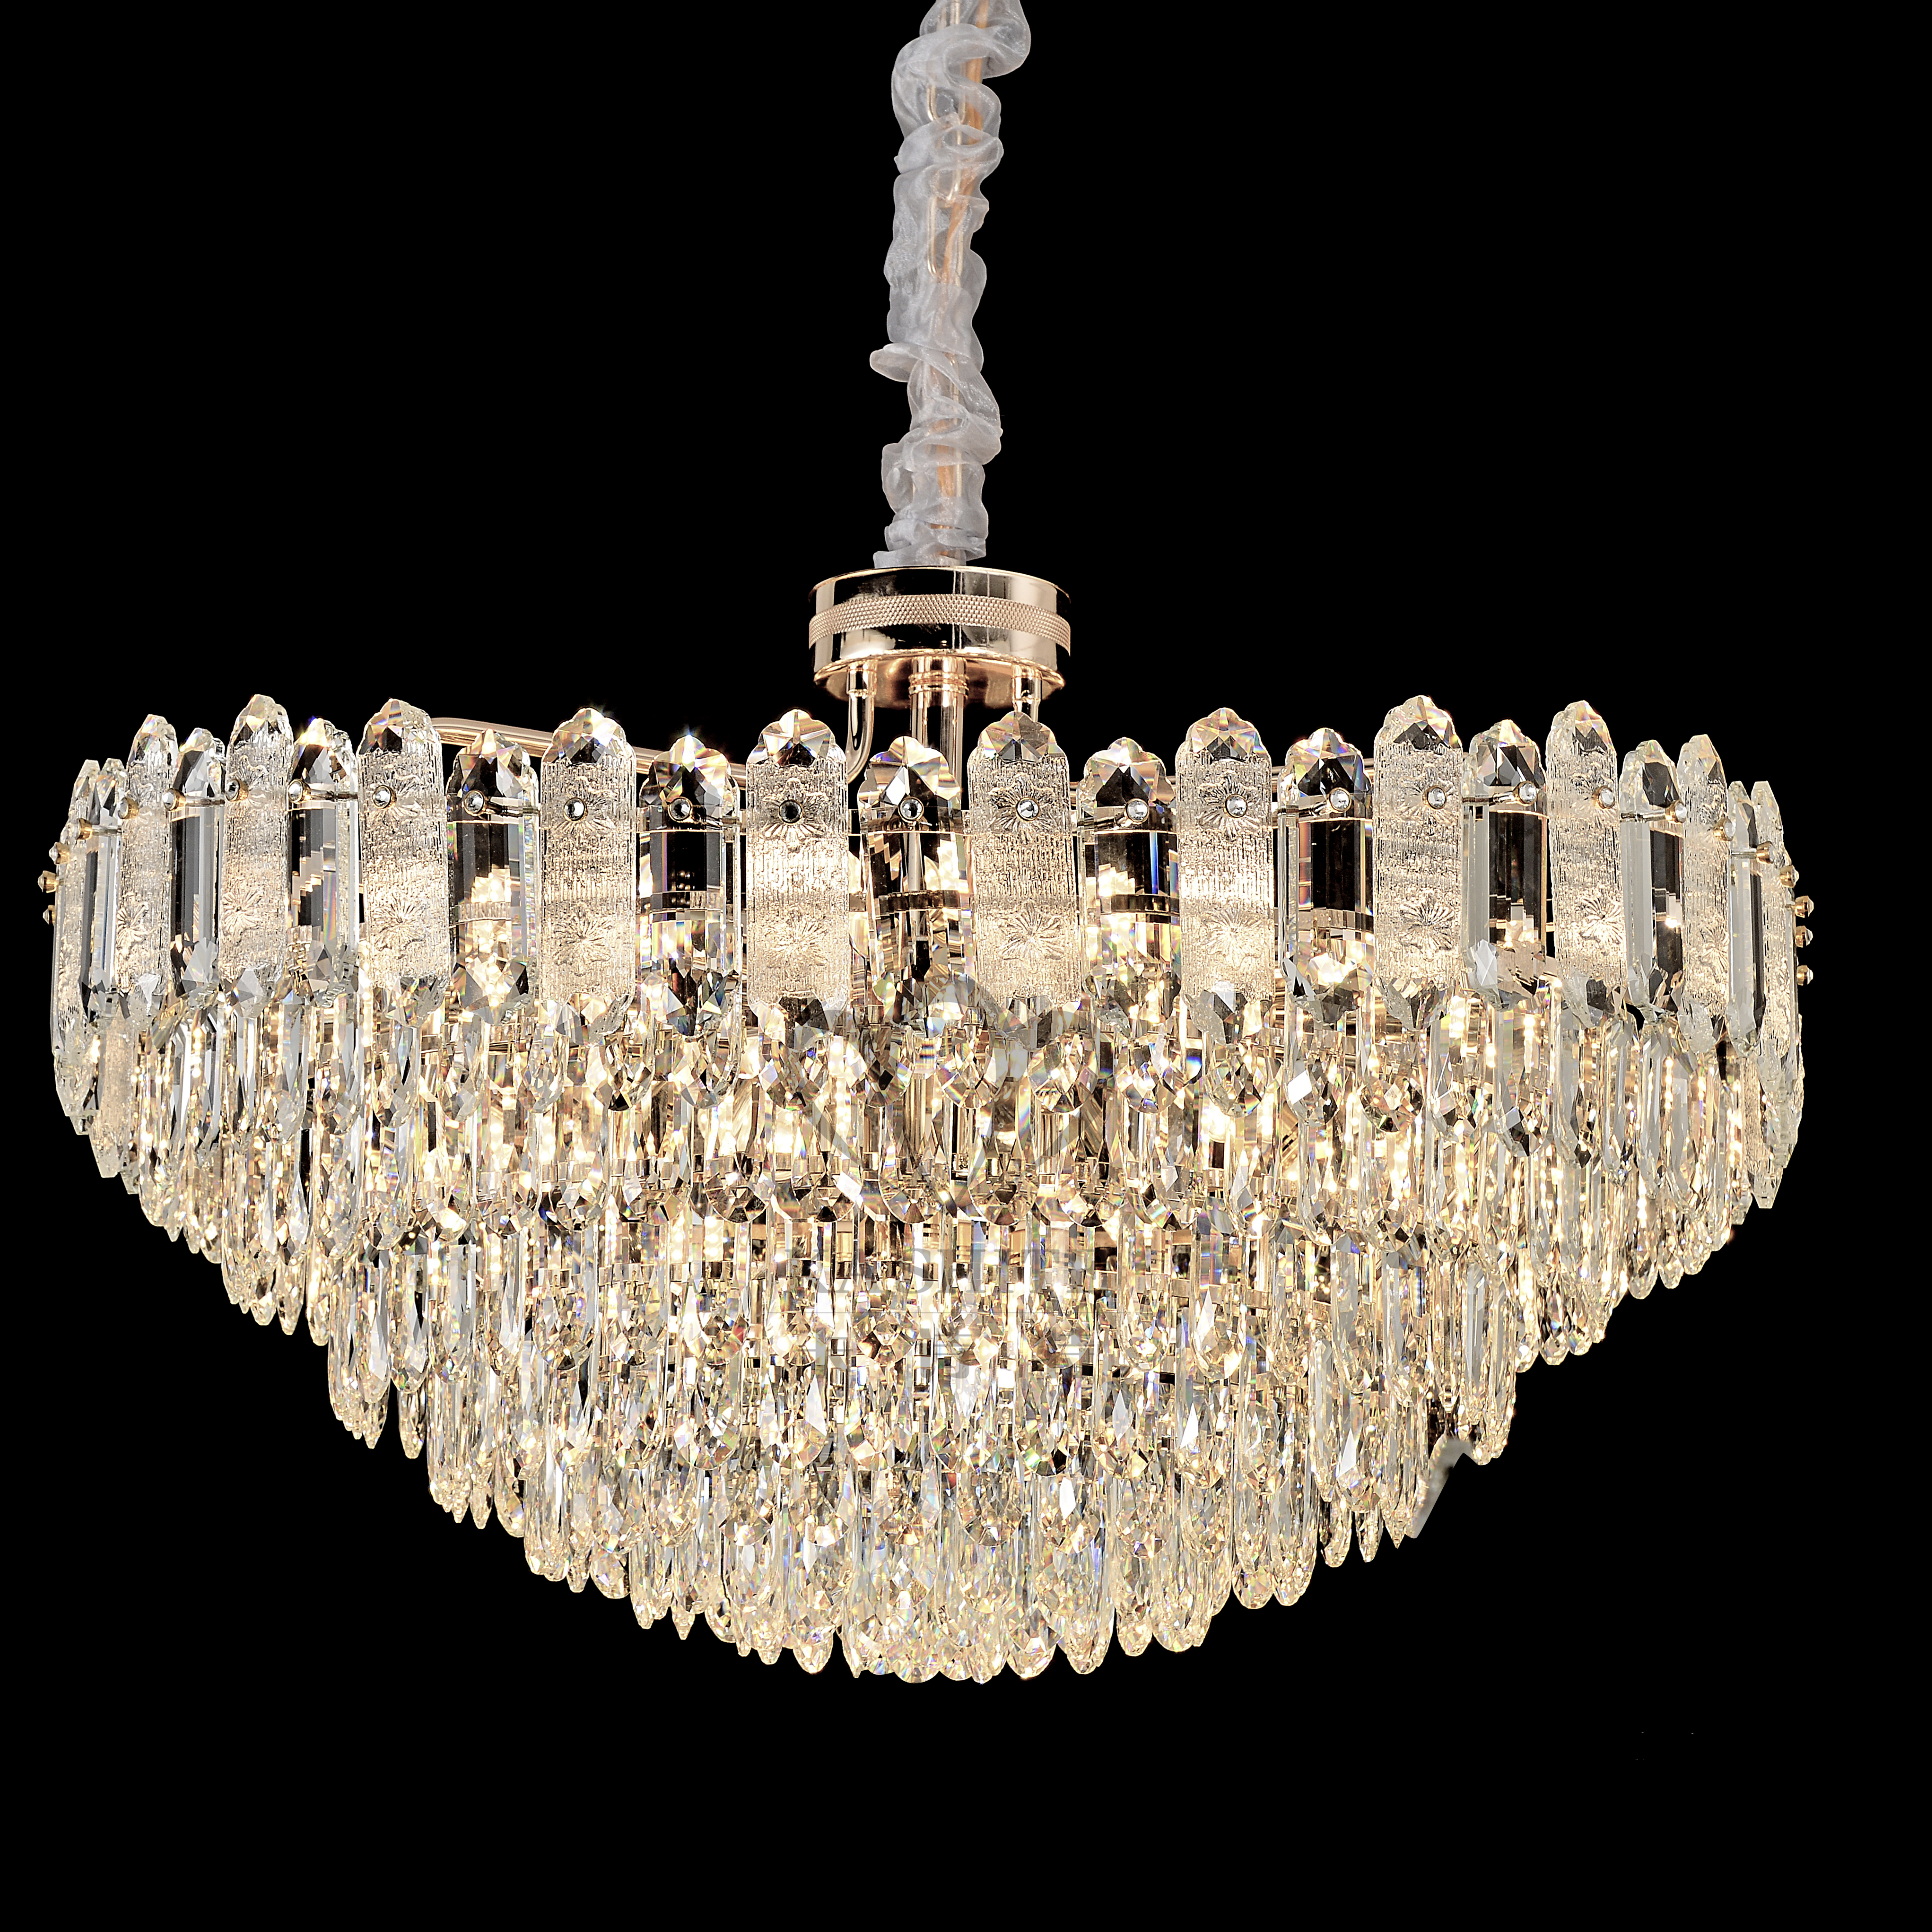 High-end atmosphere, fashionable and luxurious crystal chandeliers